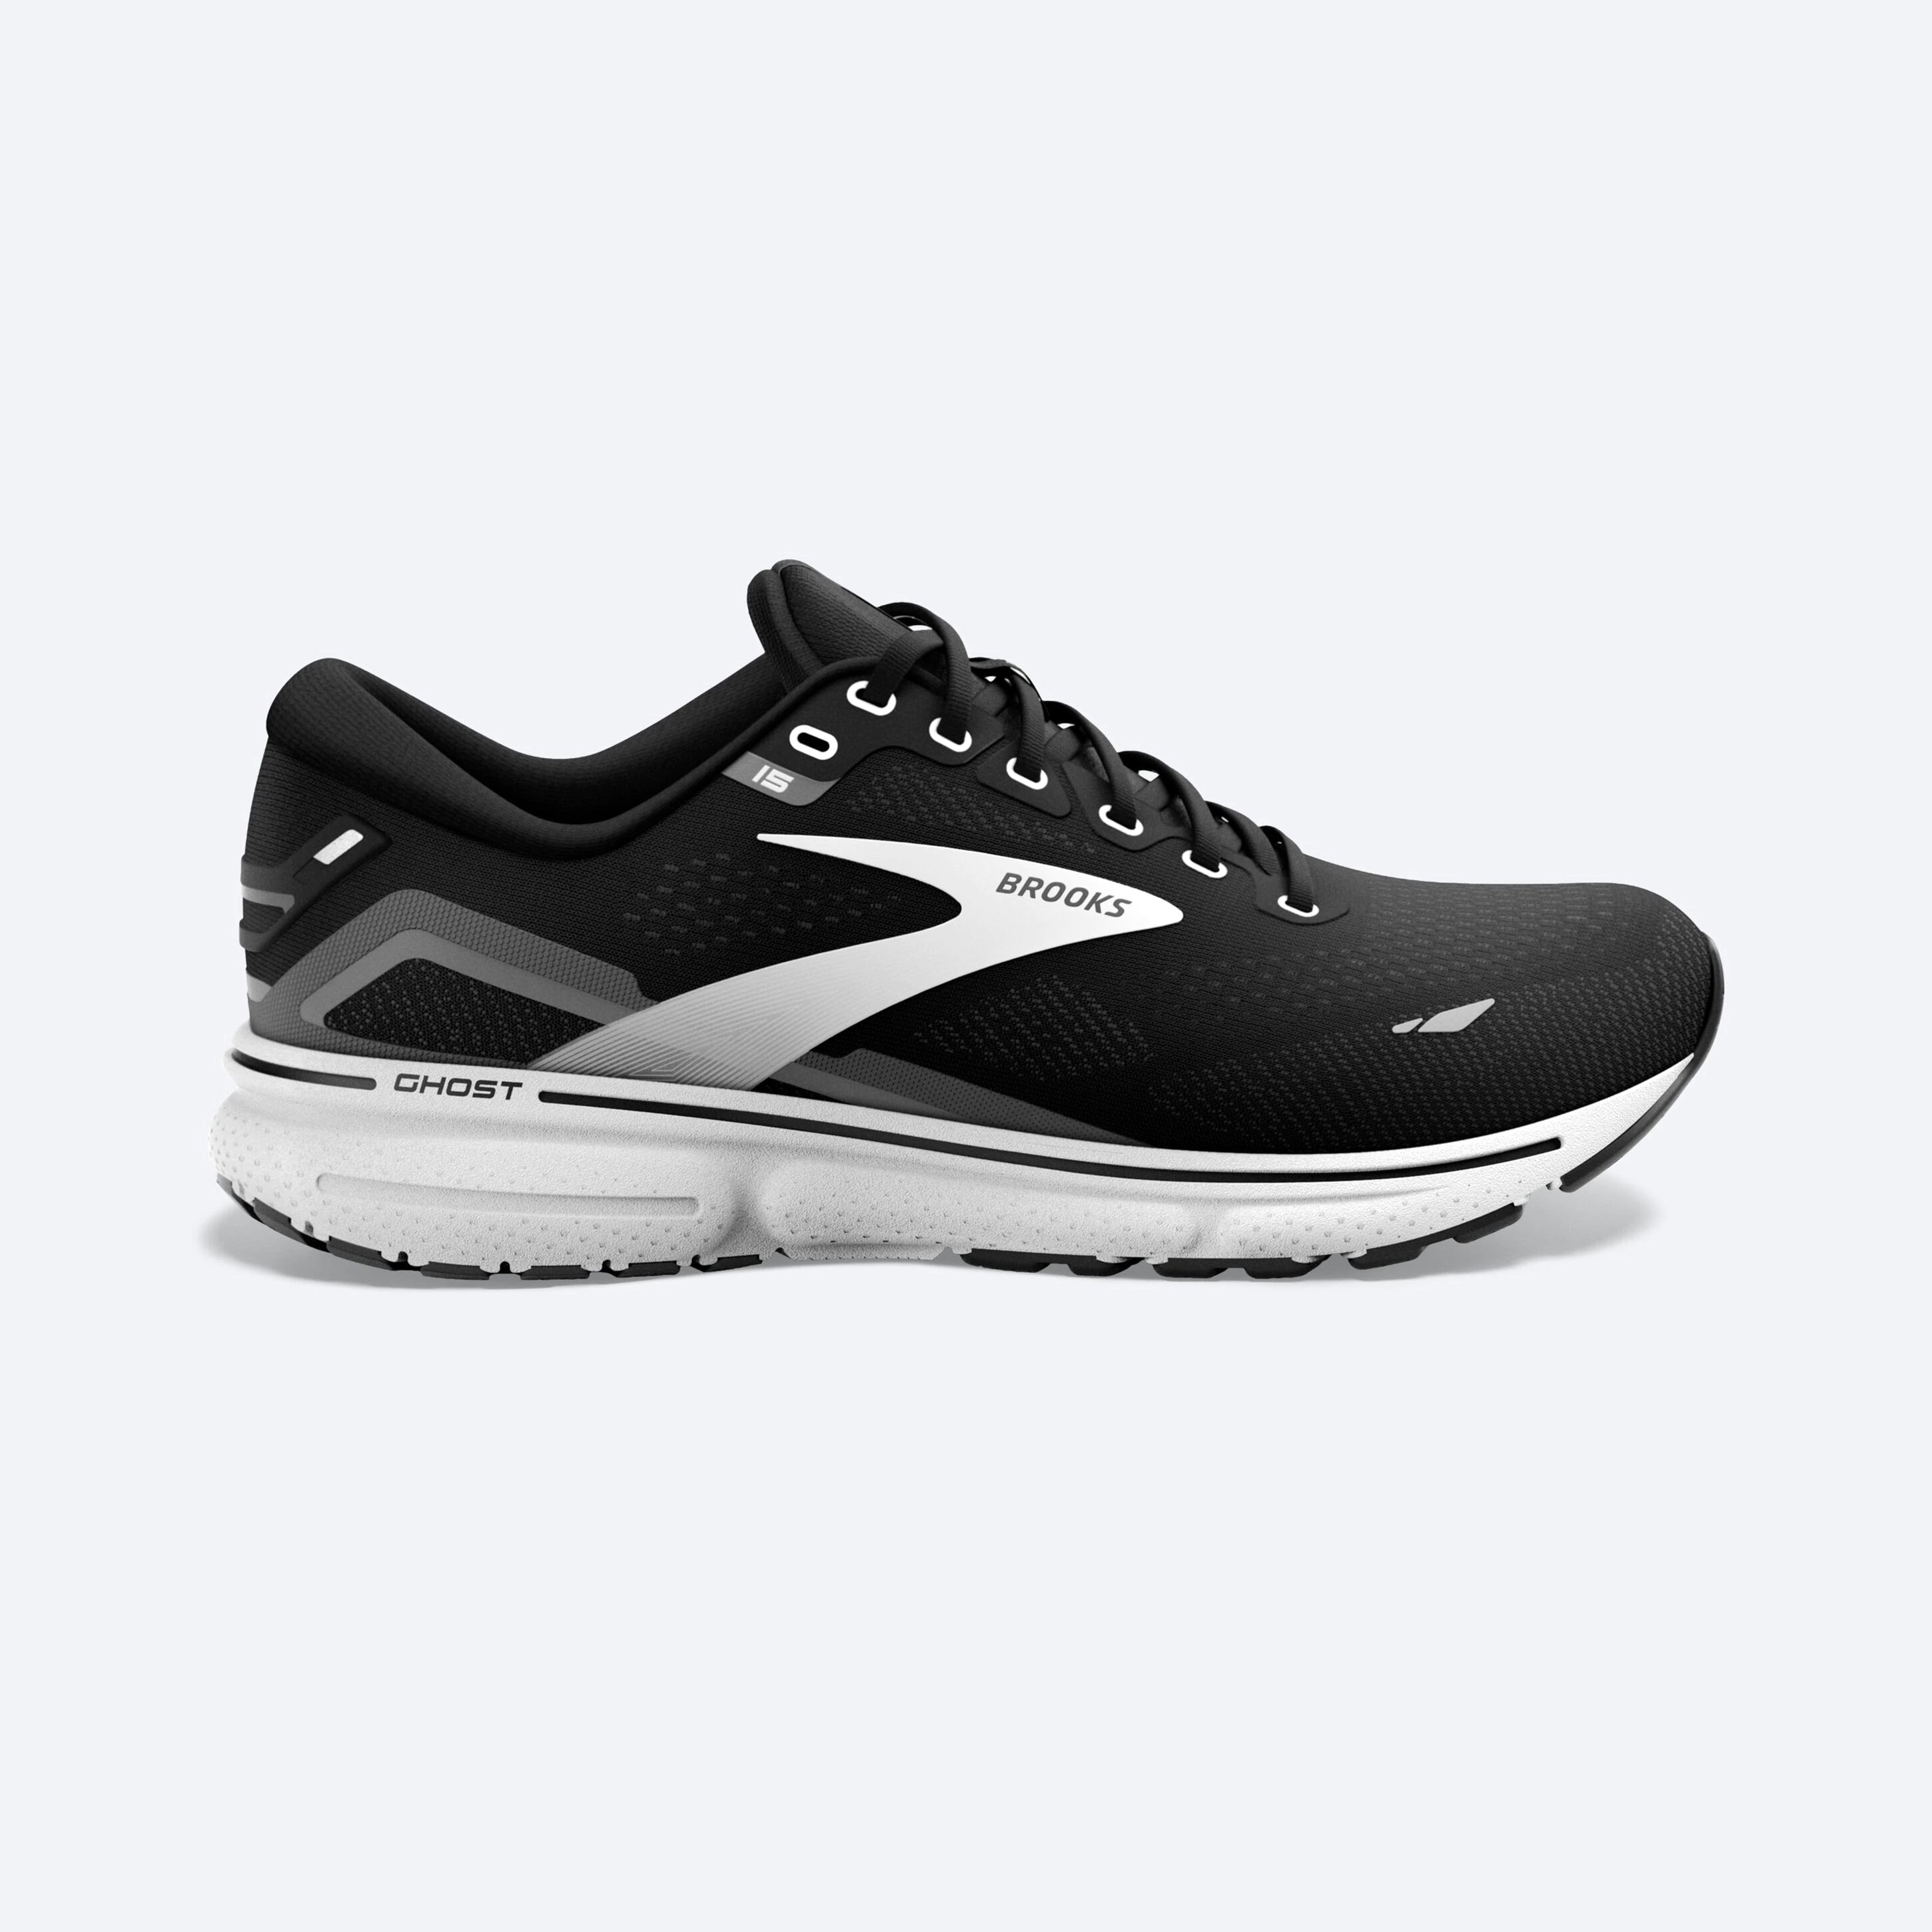 Lateral view of the Women's Ghost 15 by Brooks in the color Black/BlackenedPearl/White  